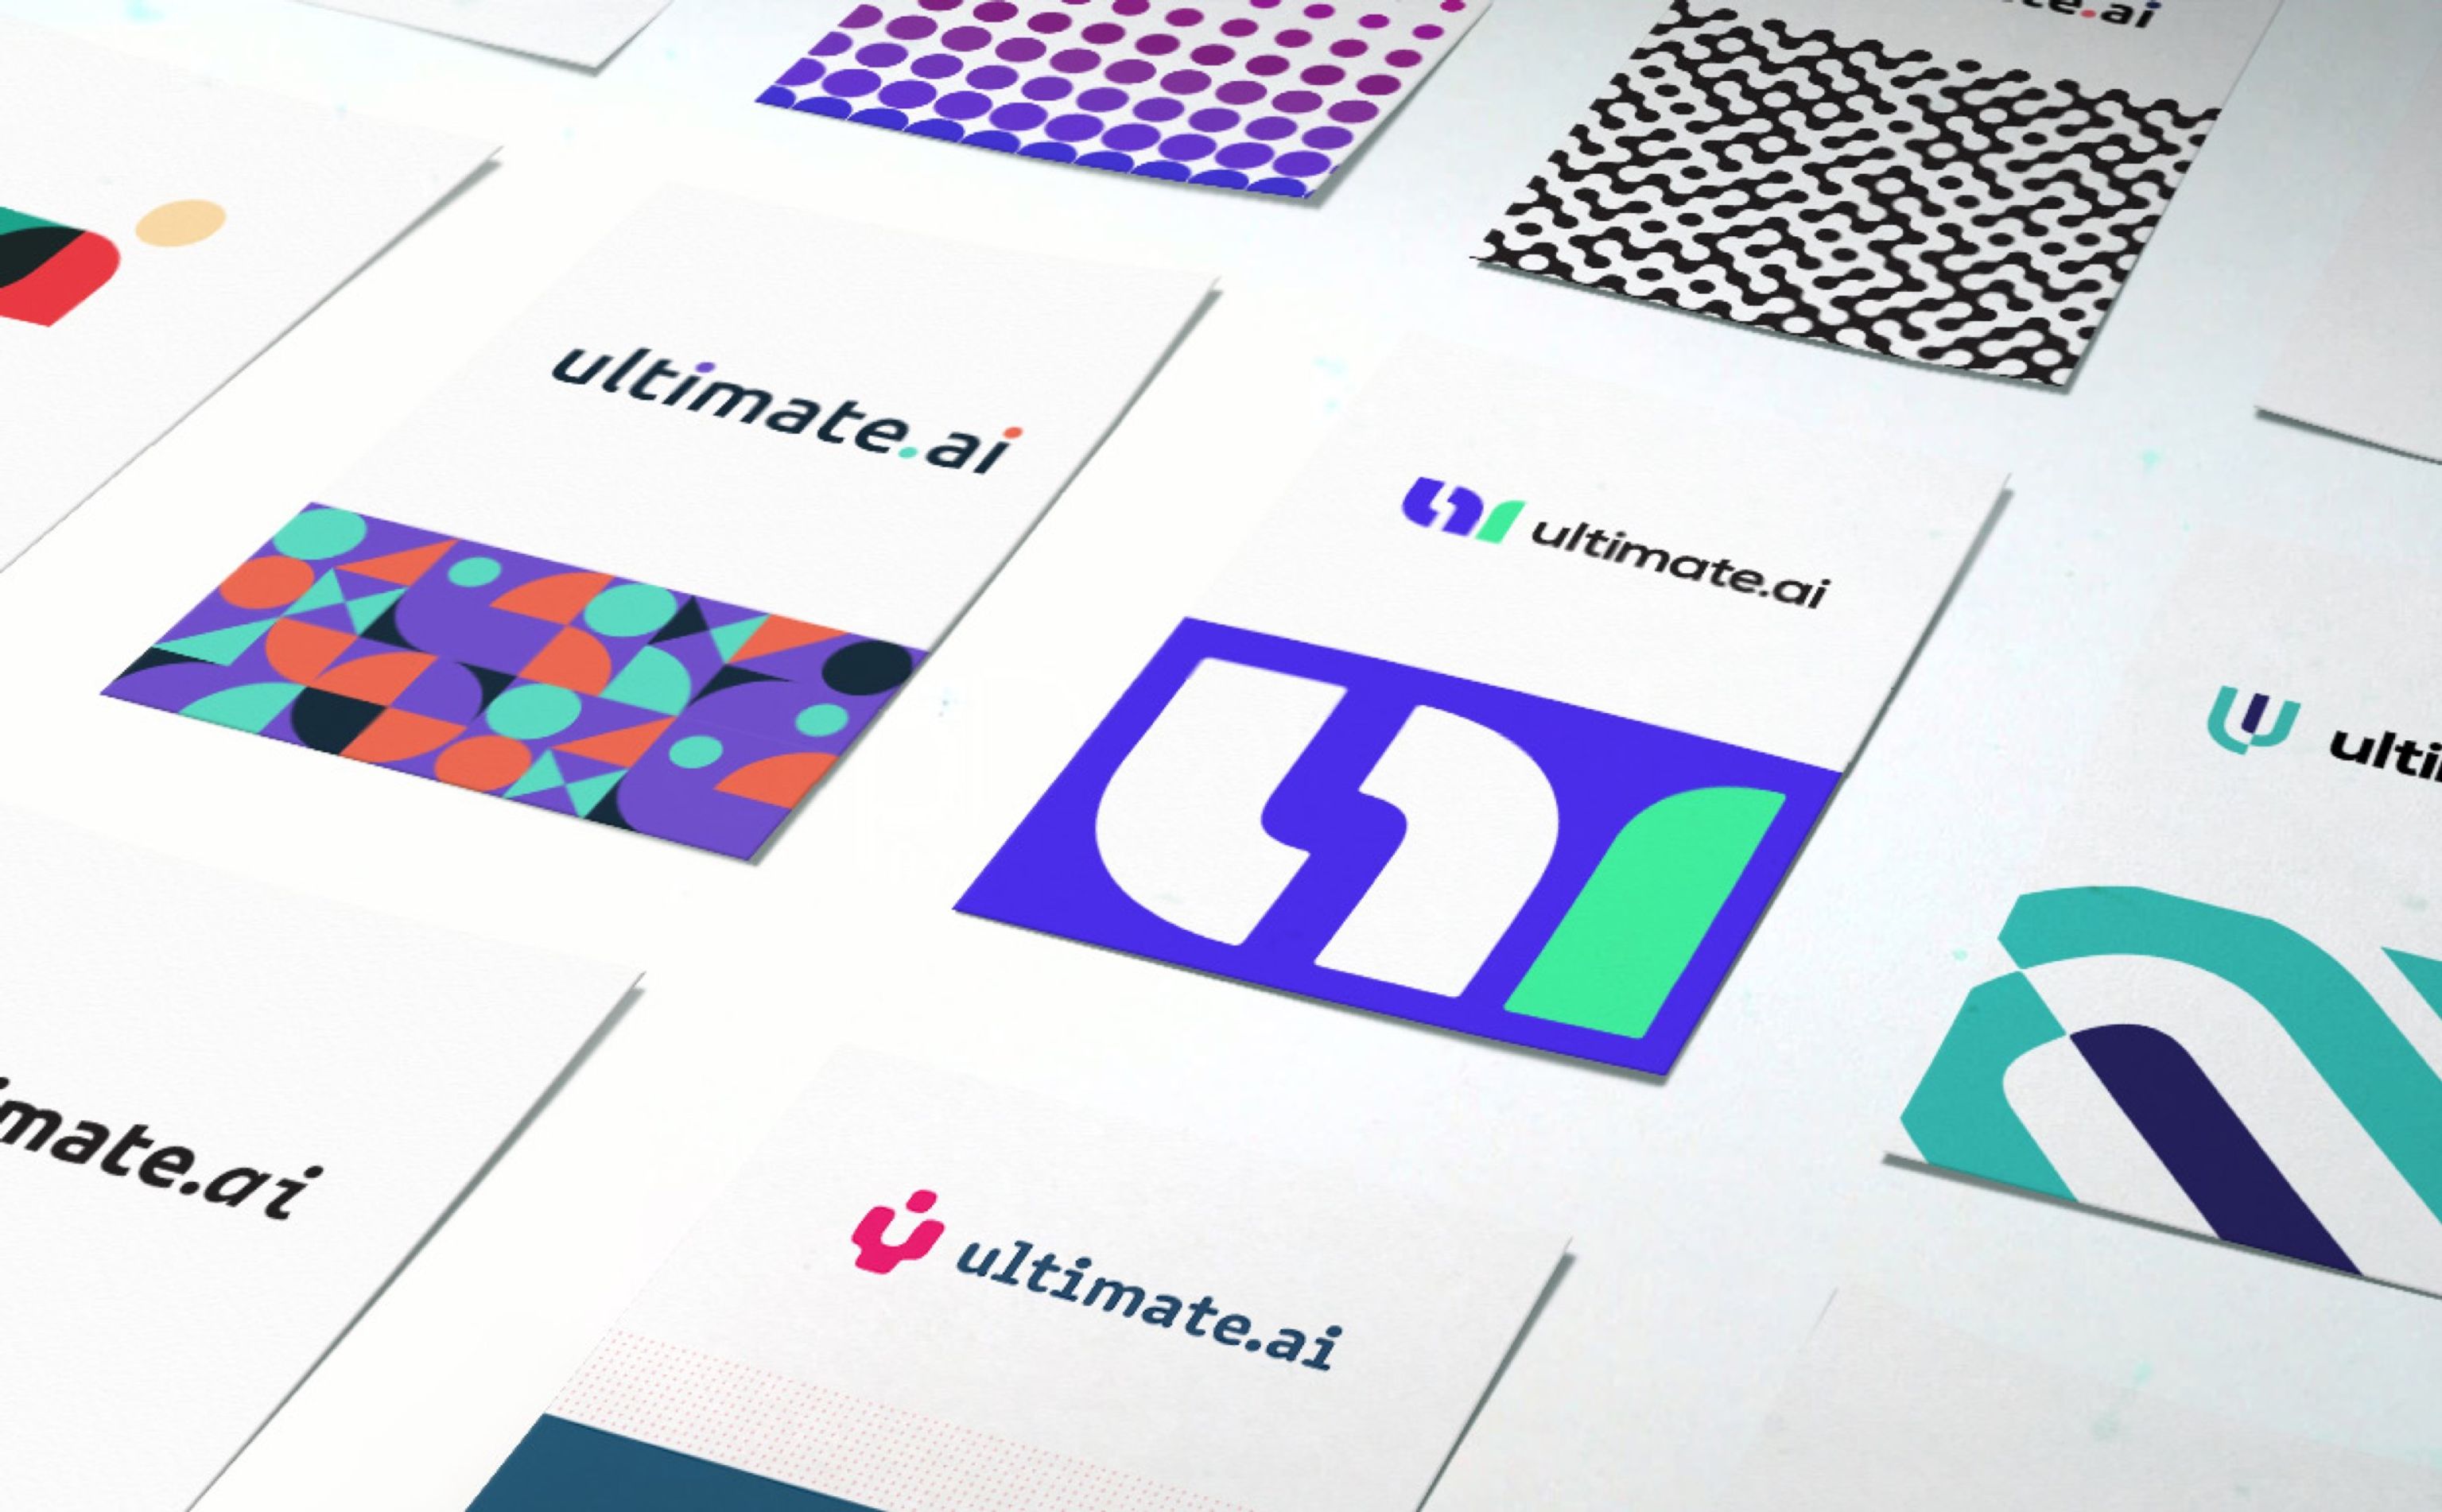 Artworked brand routes for Ultimate.ai by Function & Form